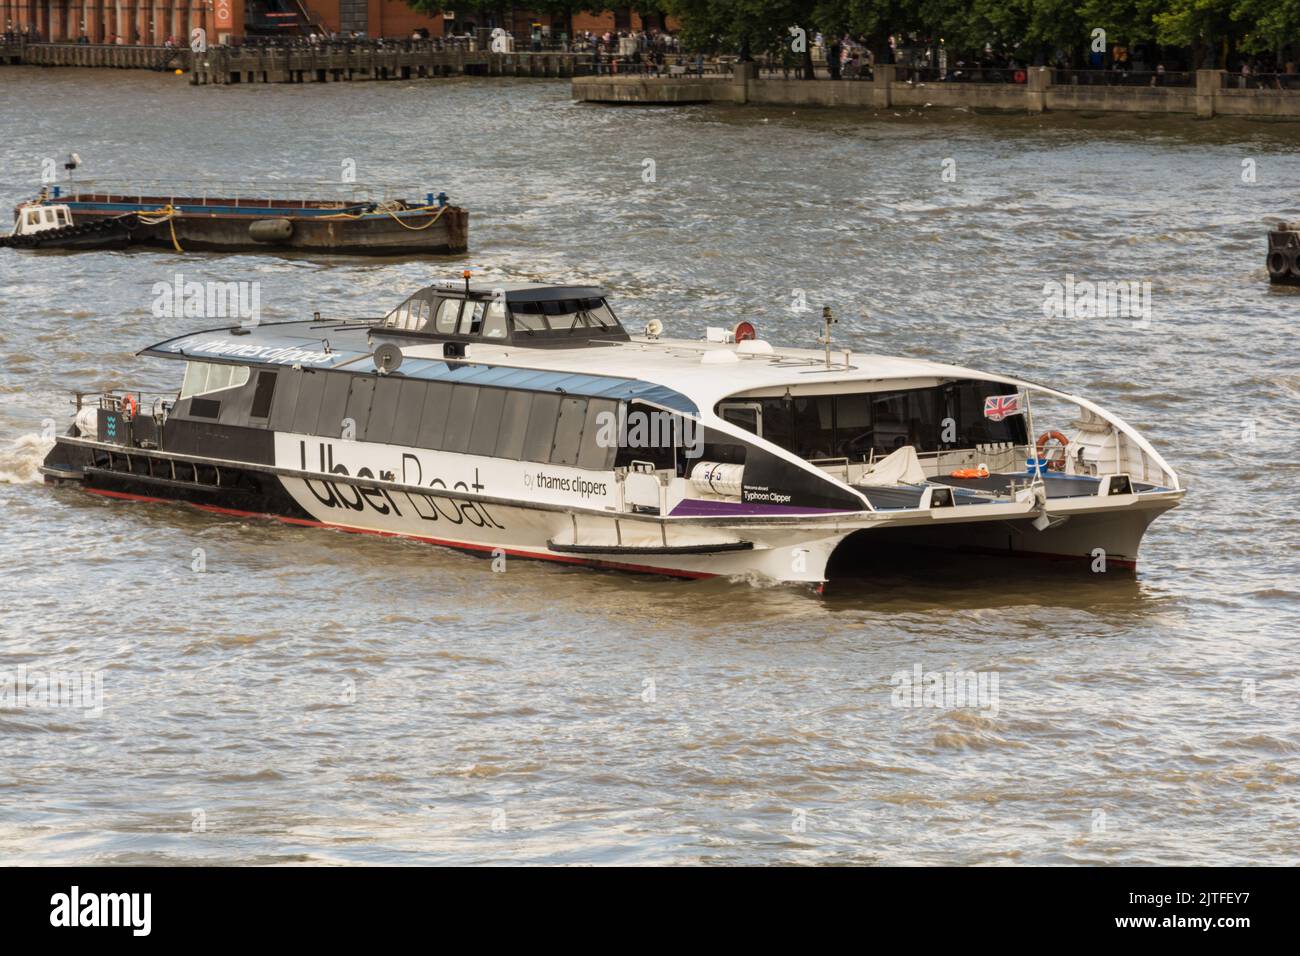 Closeup of The Typhoon Clipper a Thames Clipper Uber Boat on the River Thames, London, England, UK Stock Photo